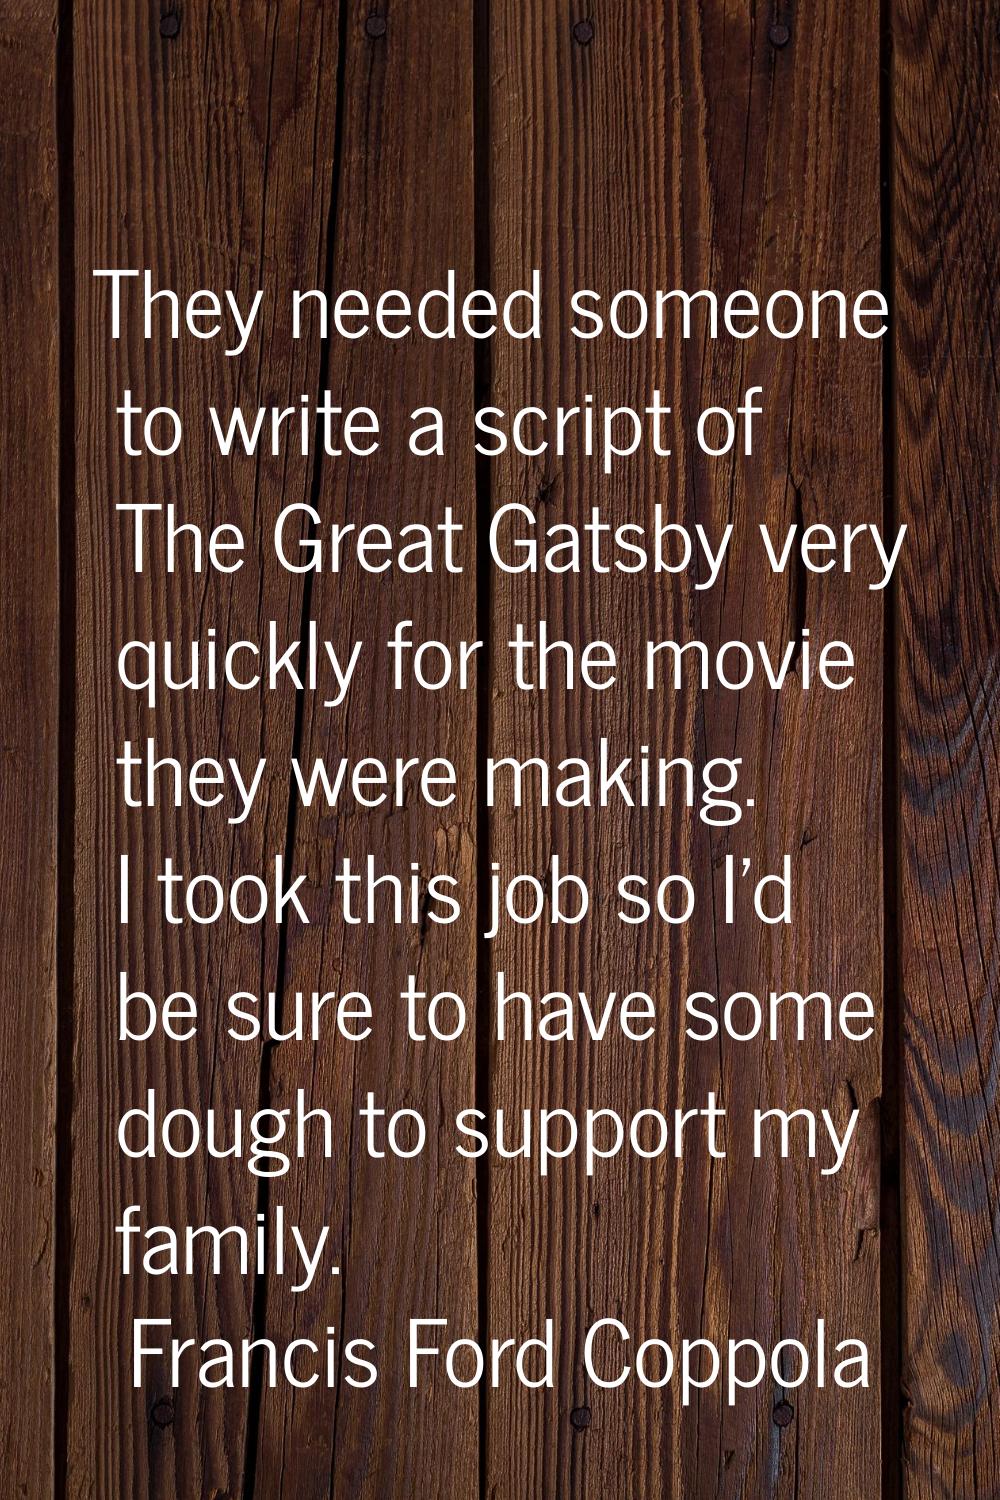 They needed someone to write a script of The Great Gatsby very quickly for the movie they were maki